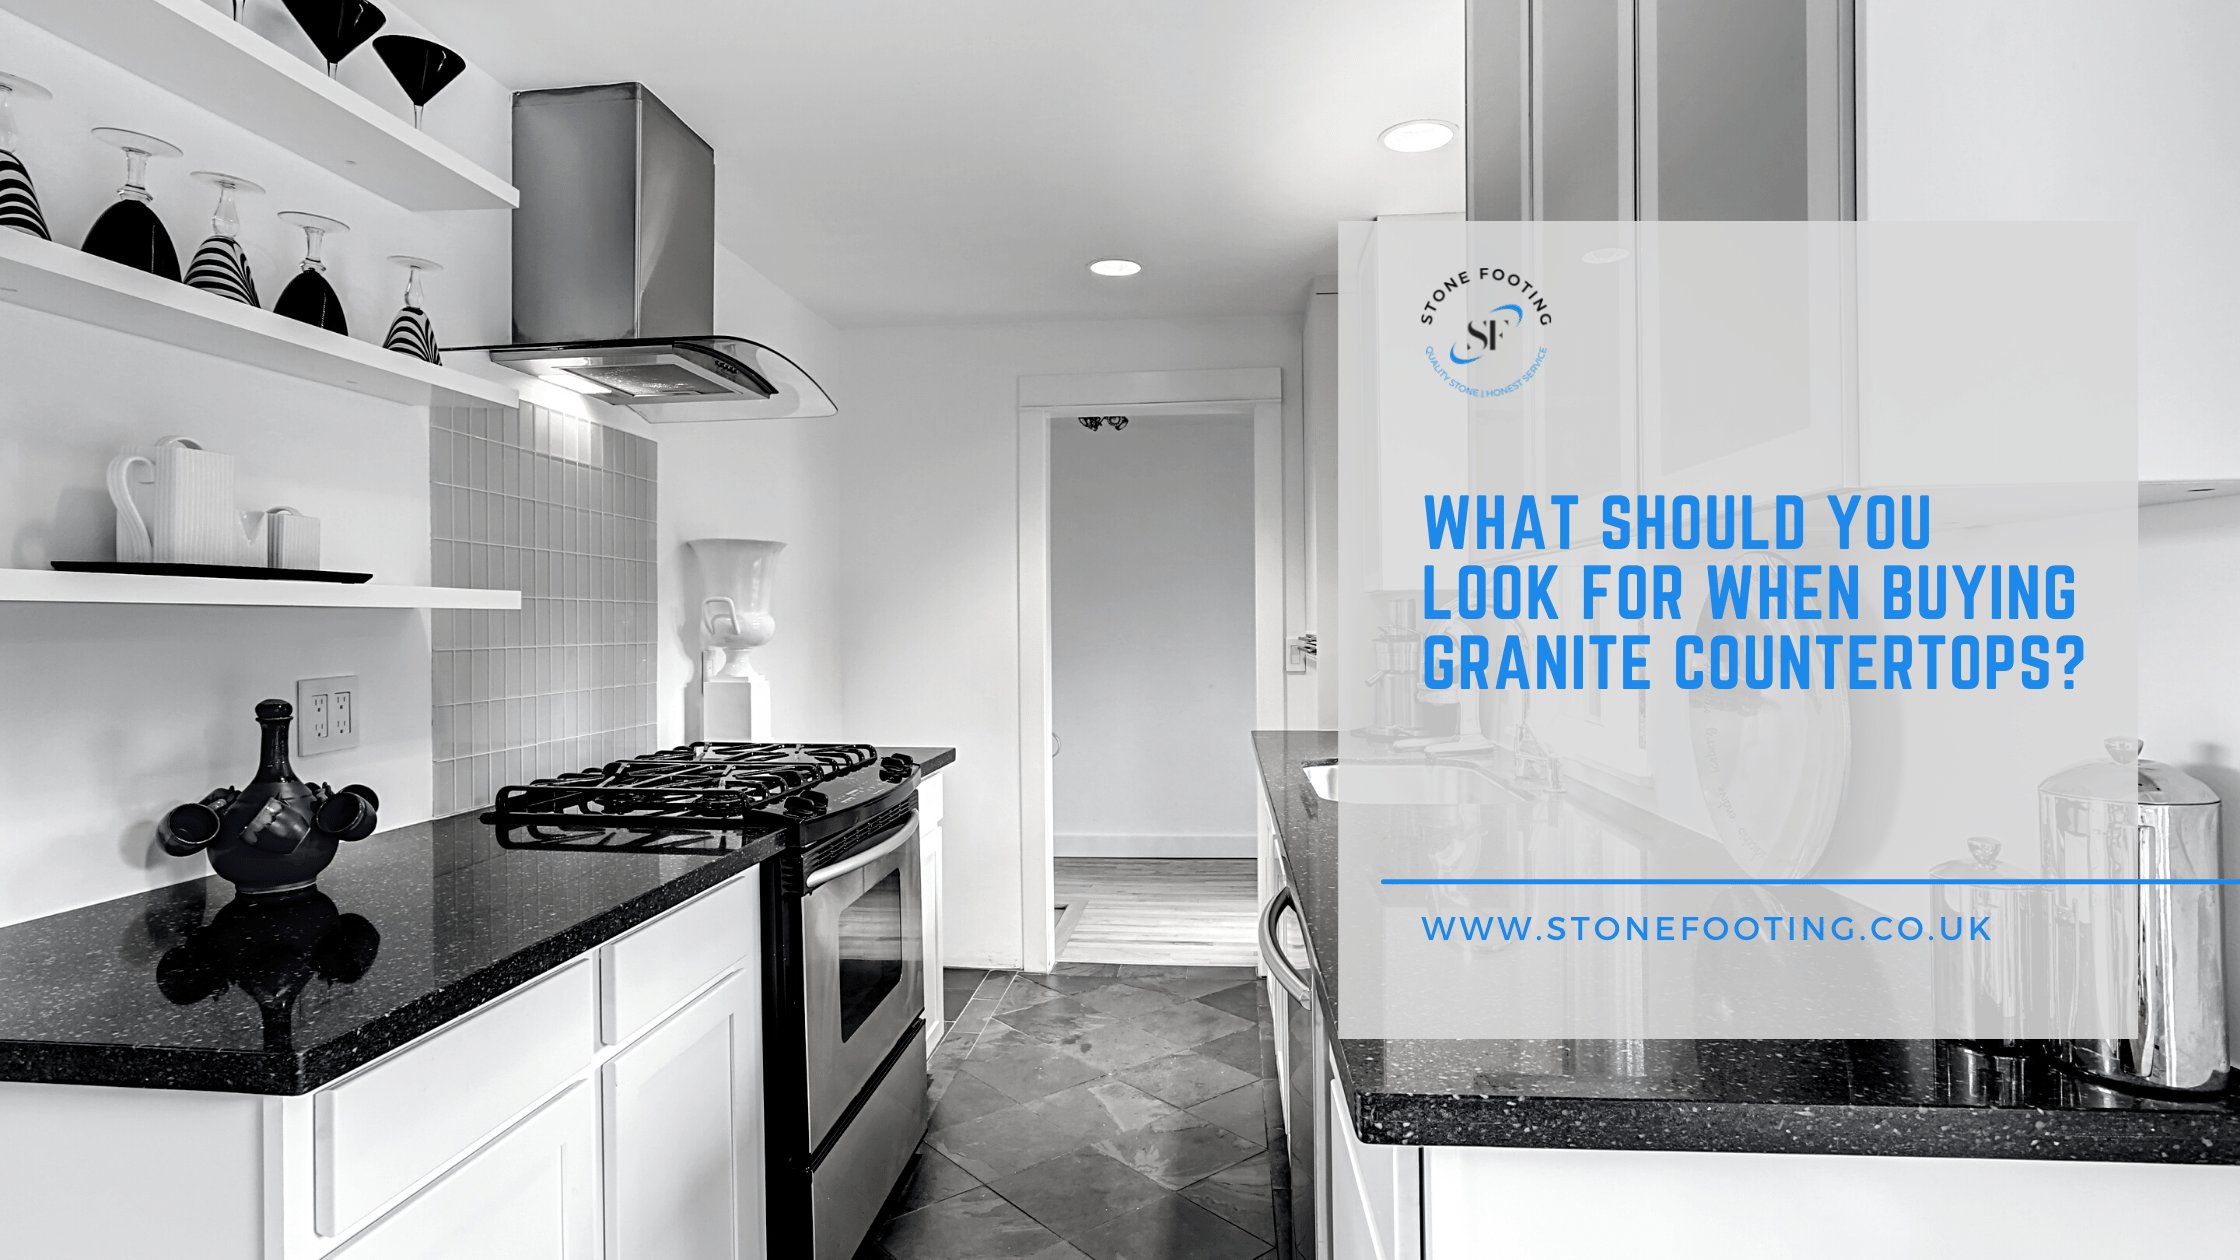 What Should You Look For When Buying Granite Countertops?